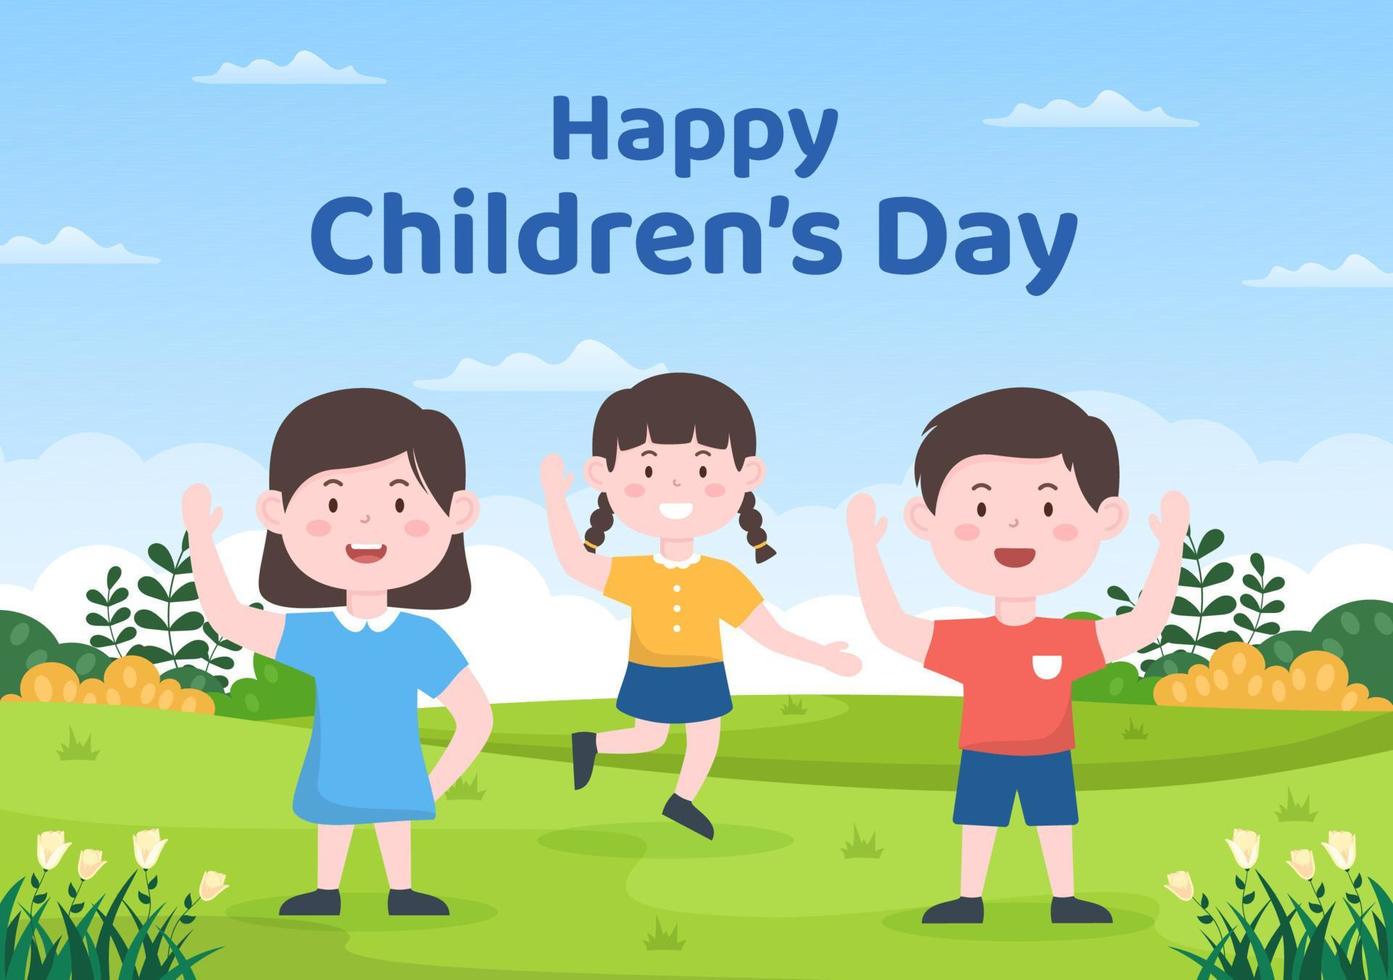 Happy Children's Day Celebration With Boys and Girls Playing in Cartoon Characters Background Illustration Suitable for Greeting Cards or Posters vector